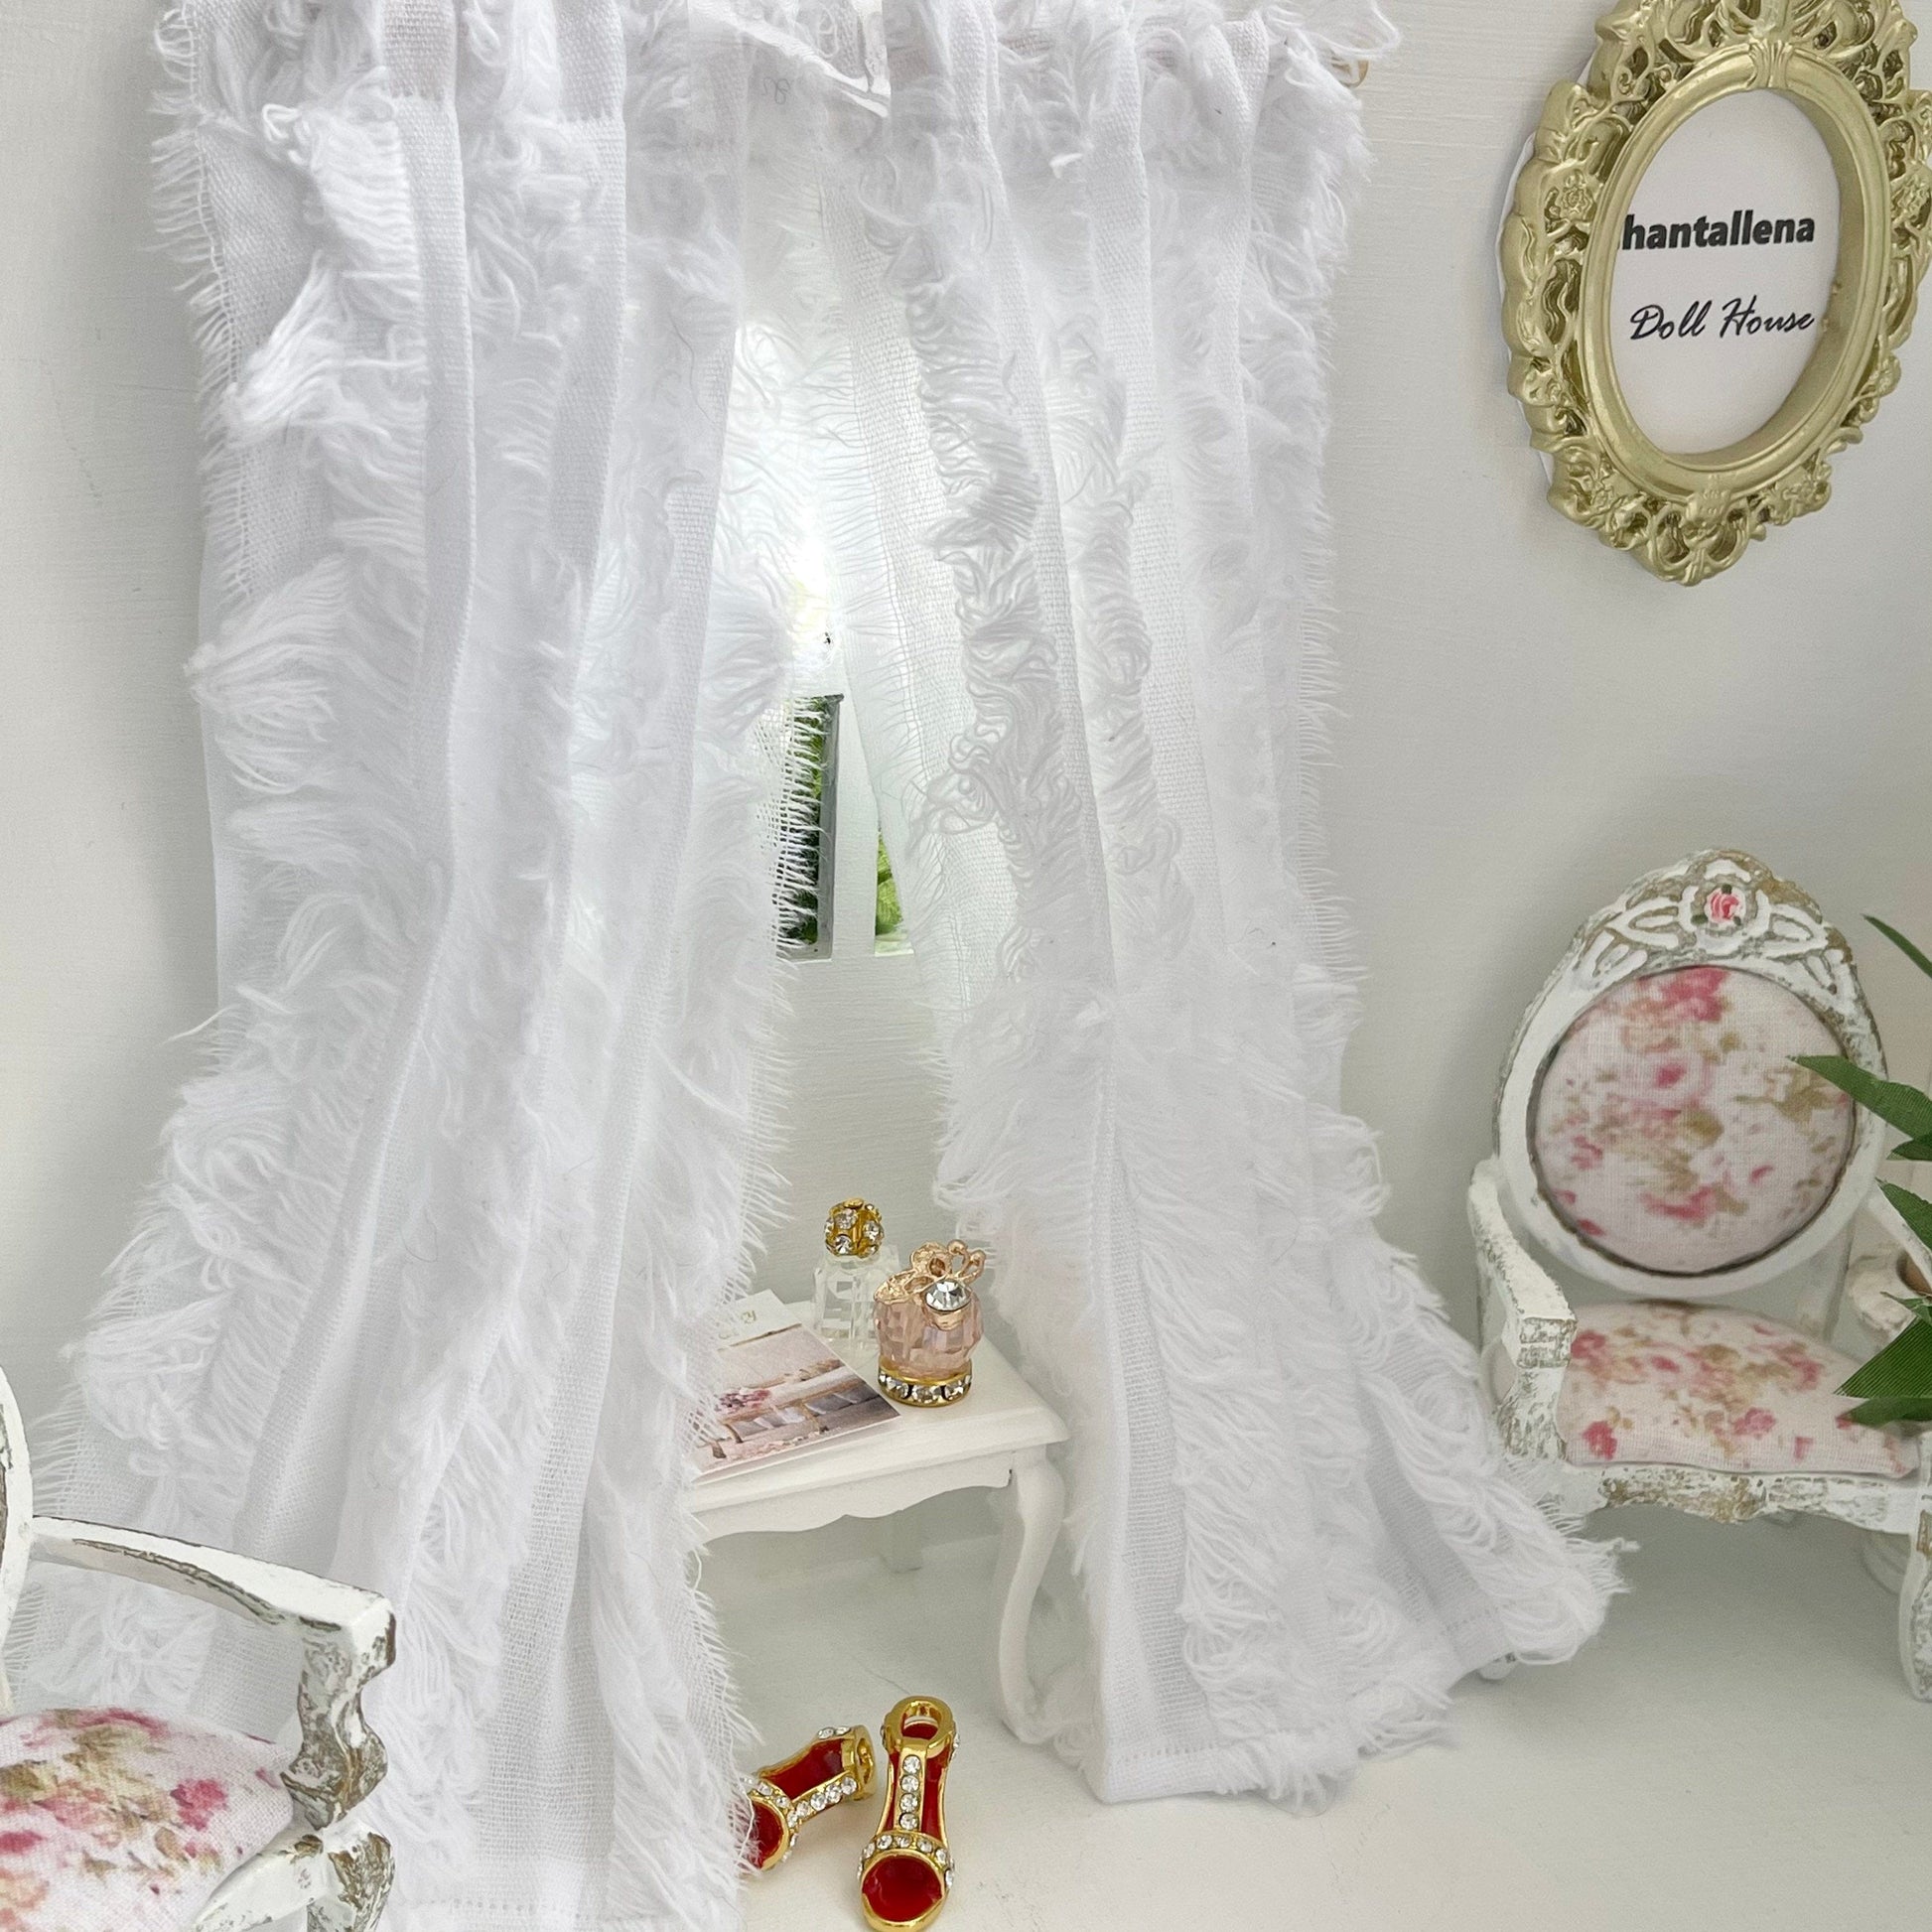 Chantallena Doll House 2 Curtains with rods CURTAINS - White Fringed 2 Panel Cotton Curtains | White Fringe | Soft Furnishings